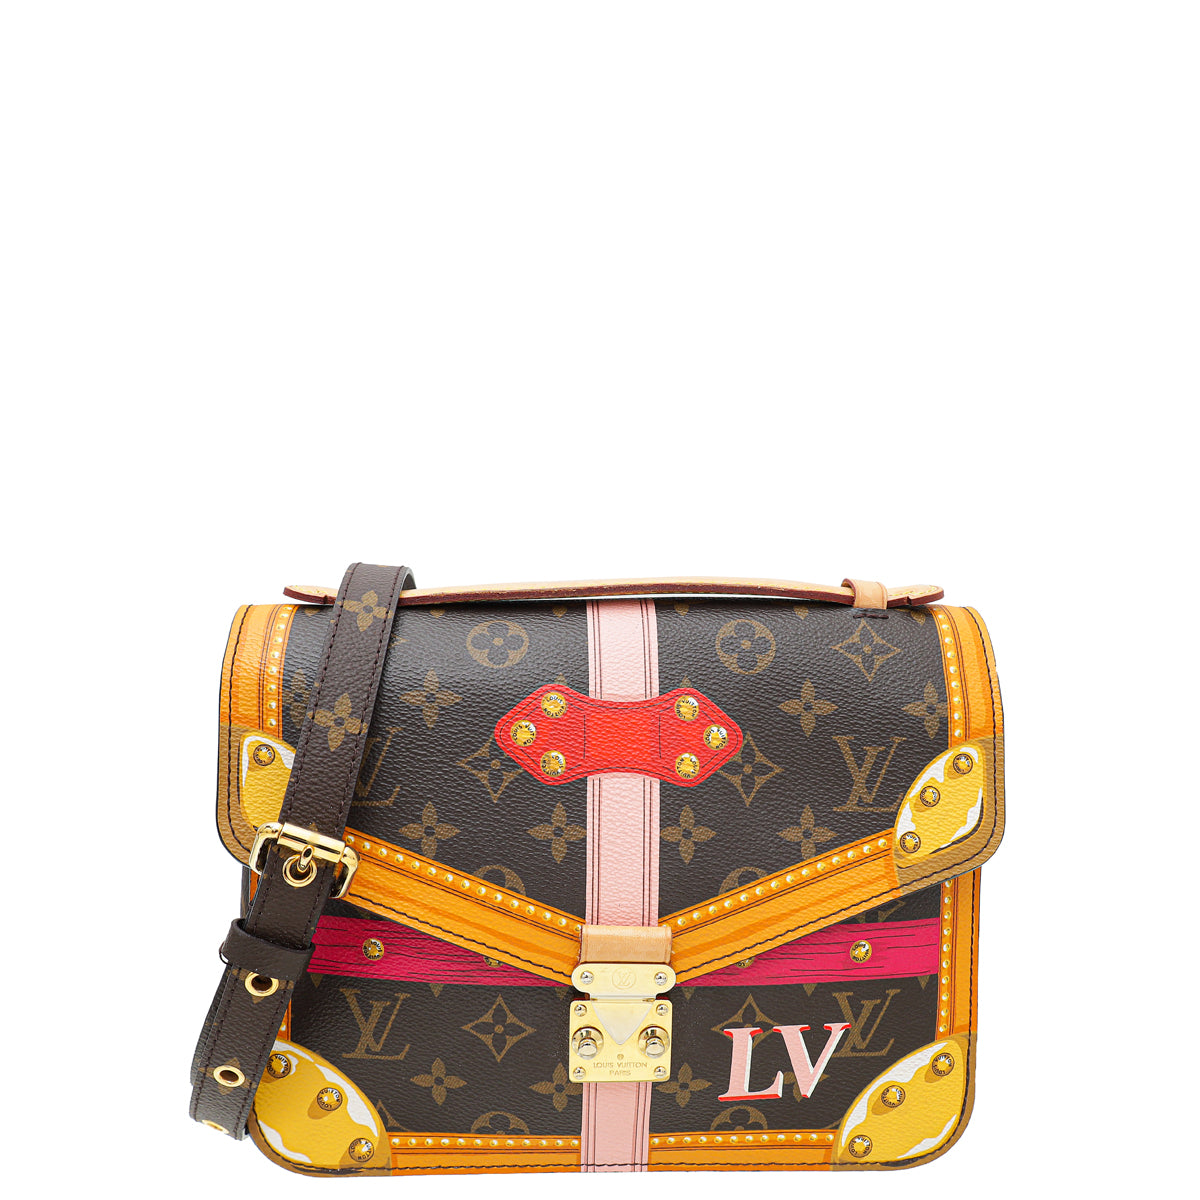 Louis Vuitton Pochette Metis Summer Trunks limited edition - Good or Bag